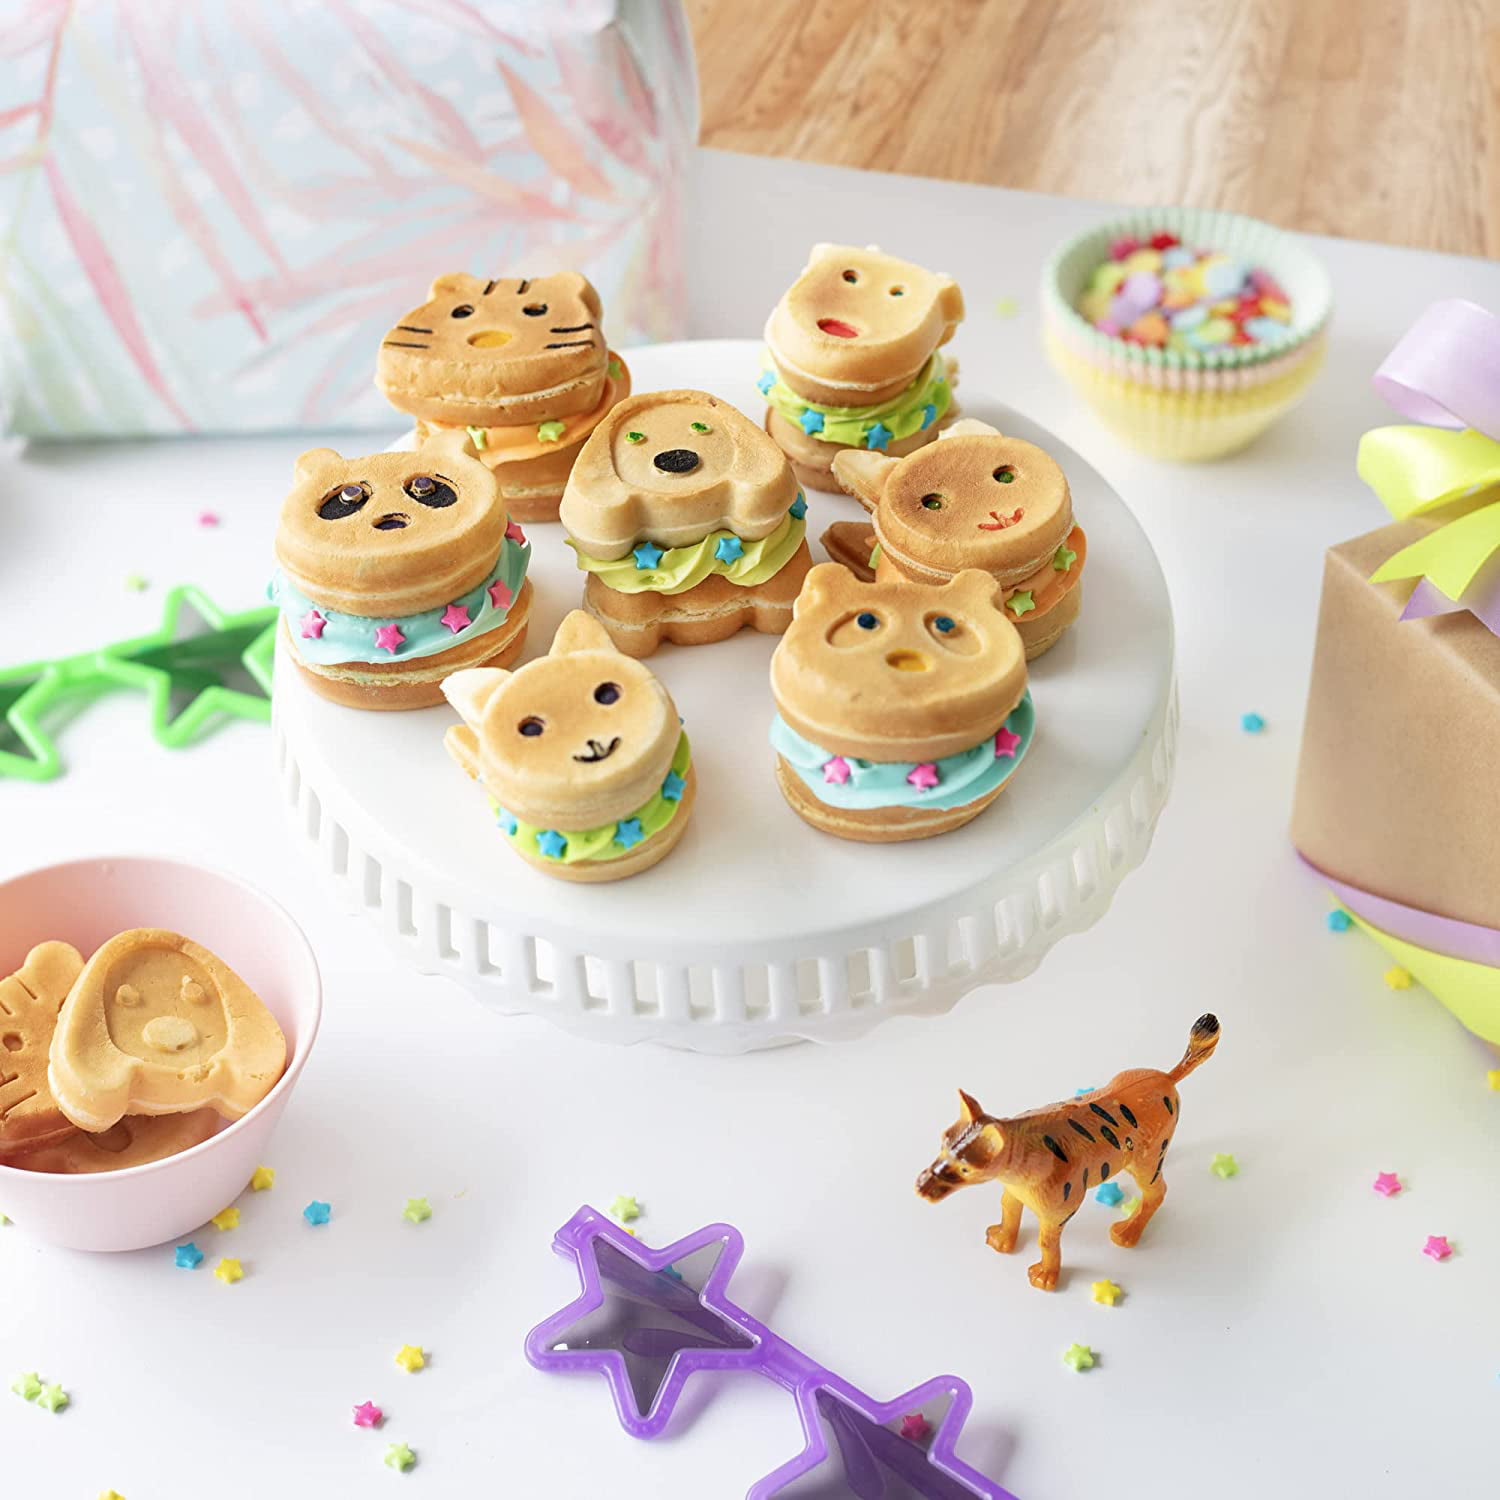 Who doesn't love mini waffles? 🧇 This set includes 7 (yes, seven!) 4